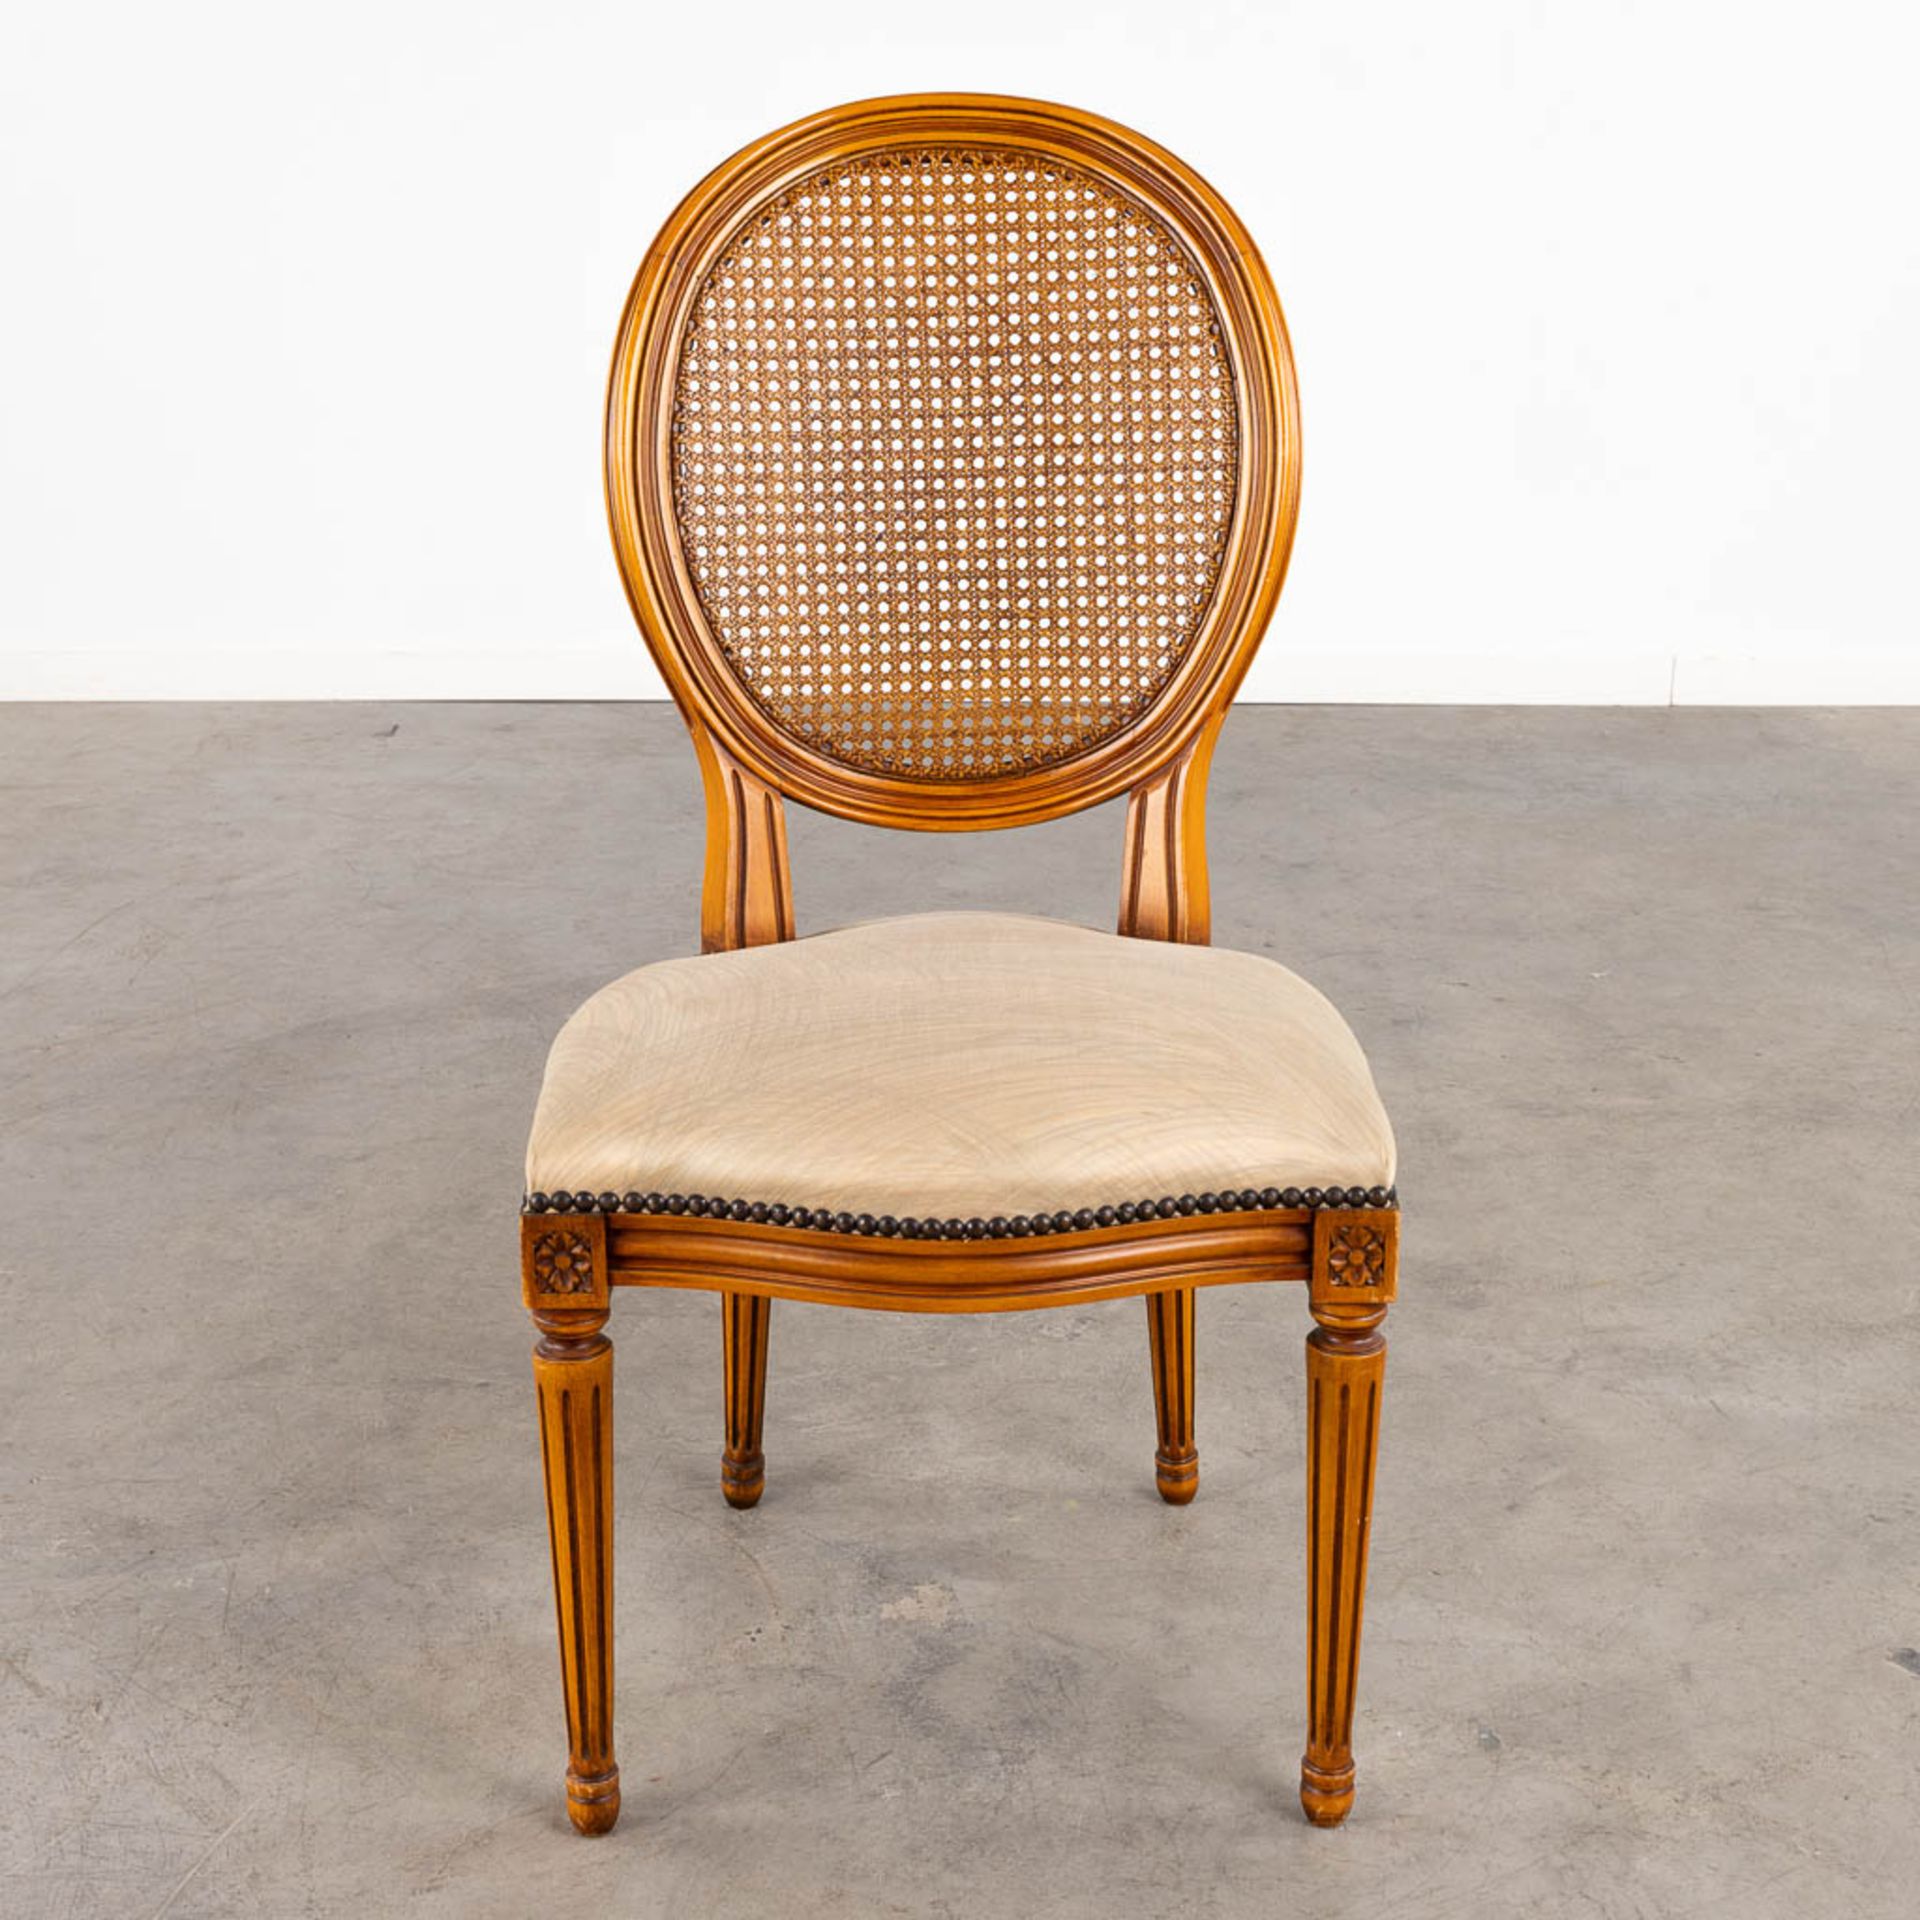 Giorgetti, 8 chairs, Louis XVI style finished with caning. (D:48 x W:48 x H:95 cm) - Image 6 of 13